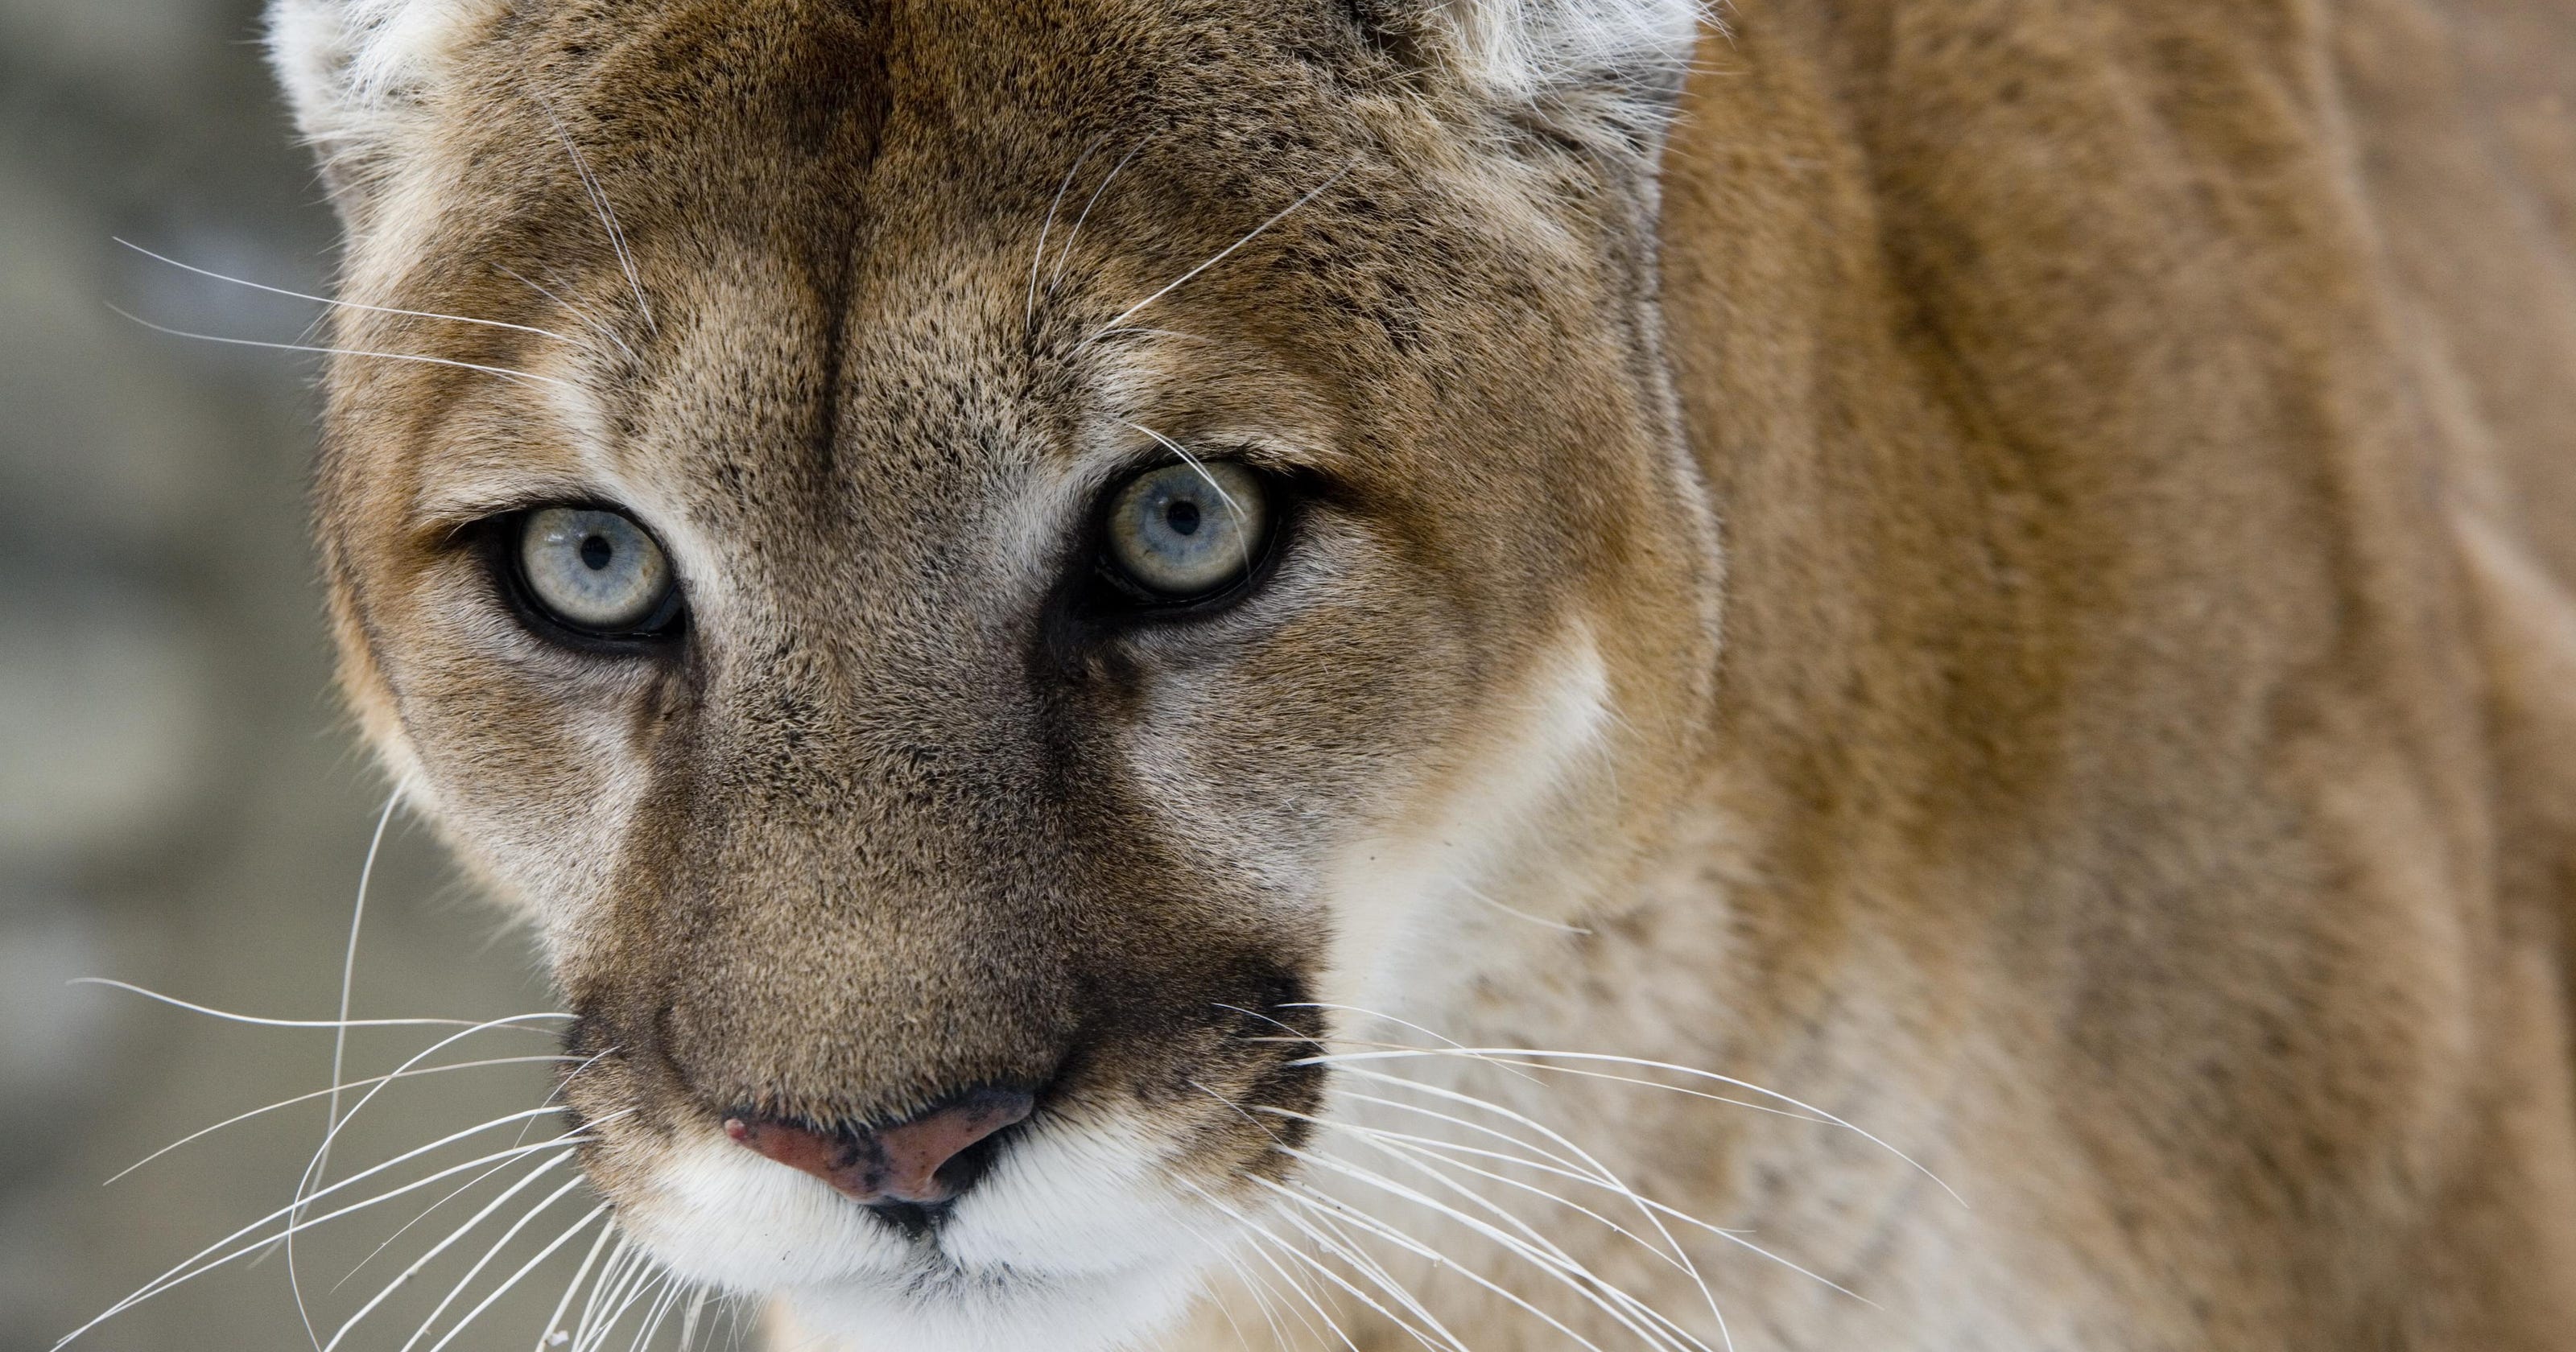 Cougars In The Wild In New York Not Yet State Says